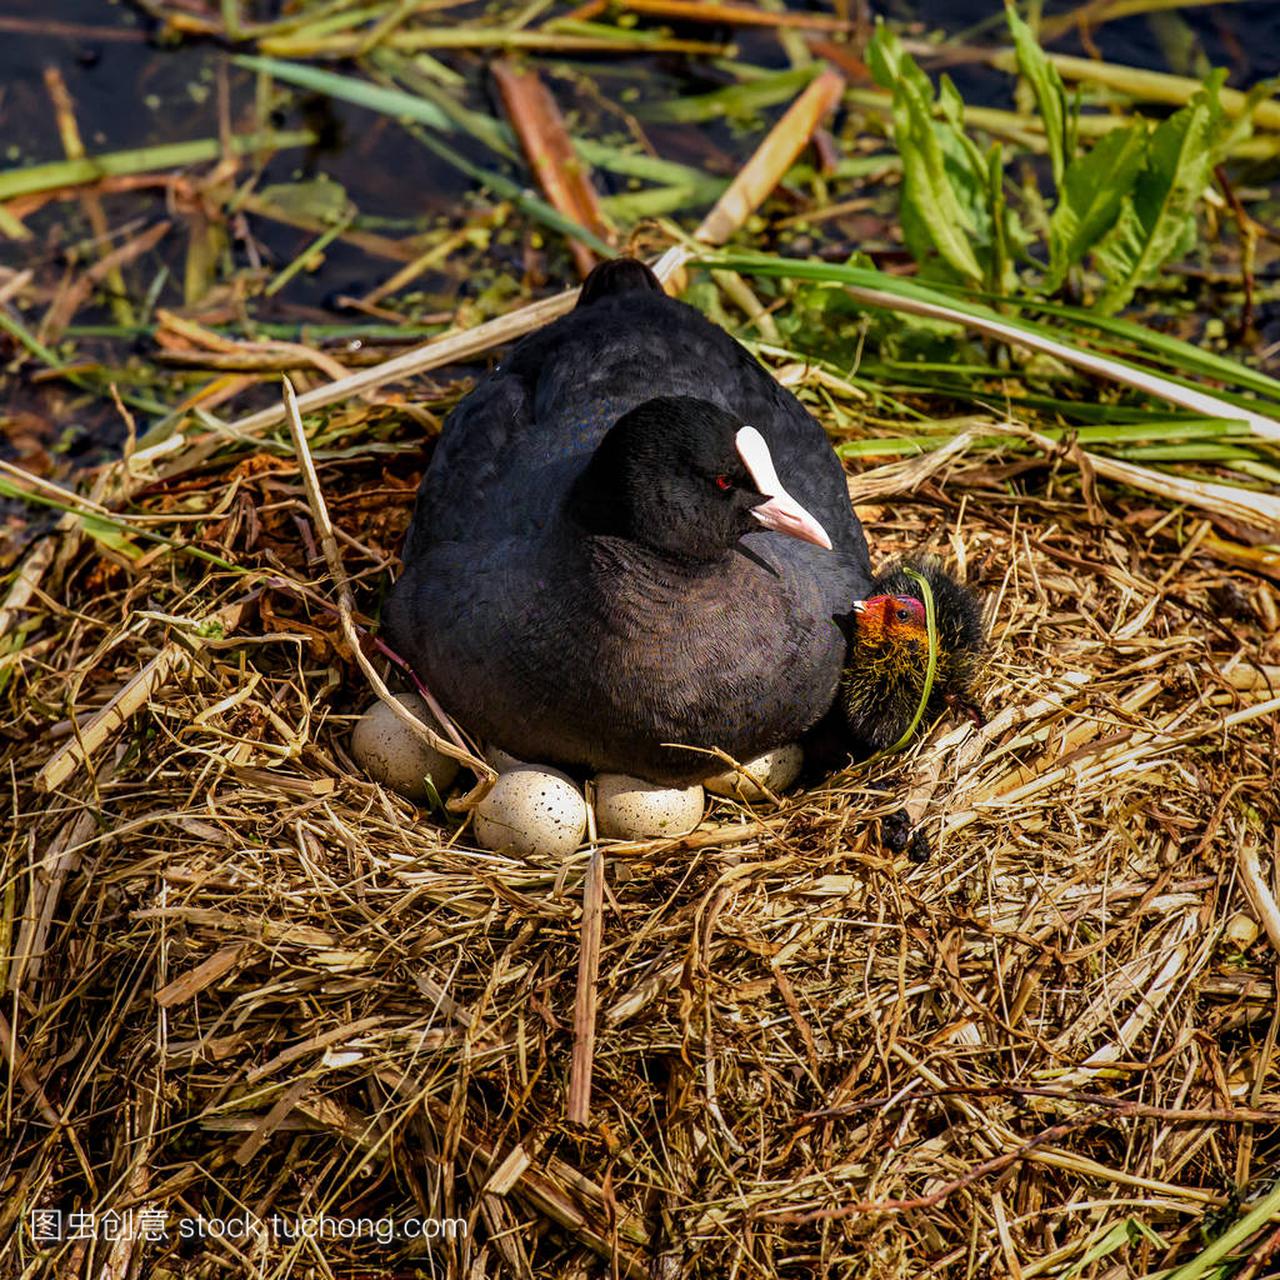 Mother coot is brooding on her nest, one young